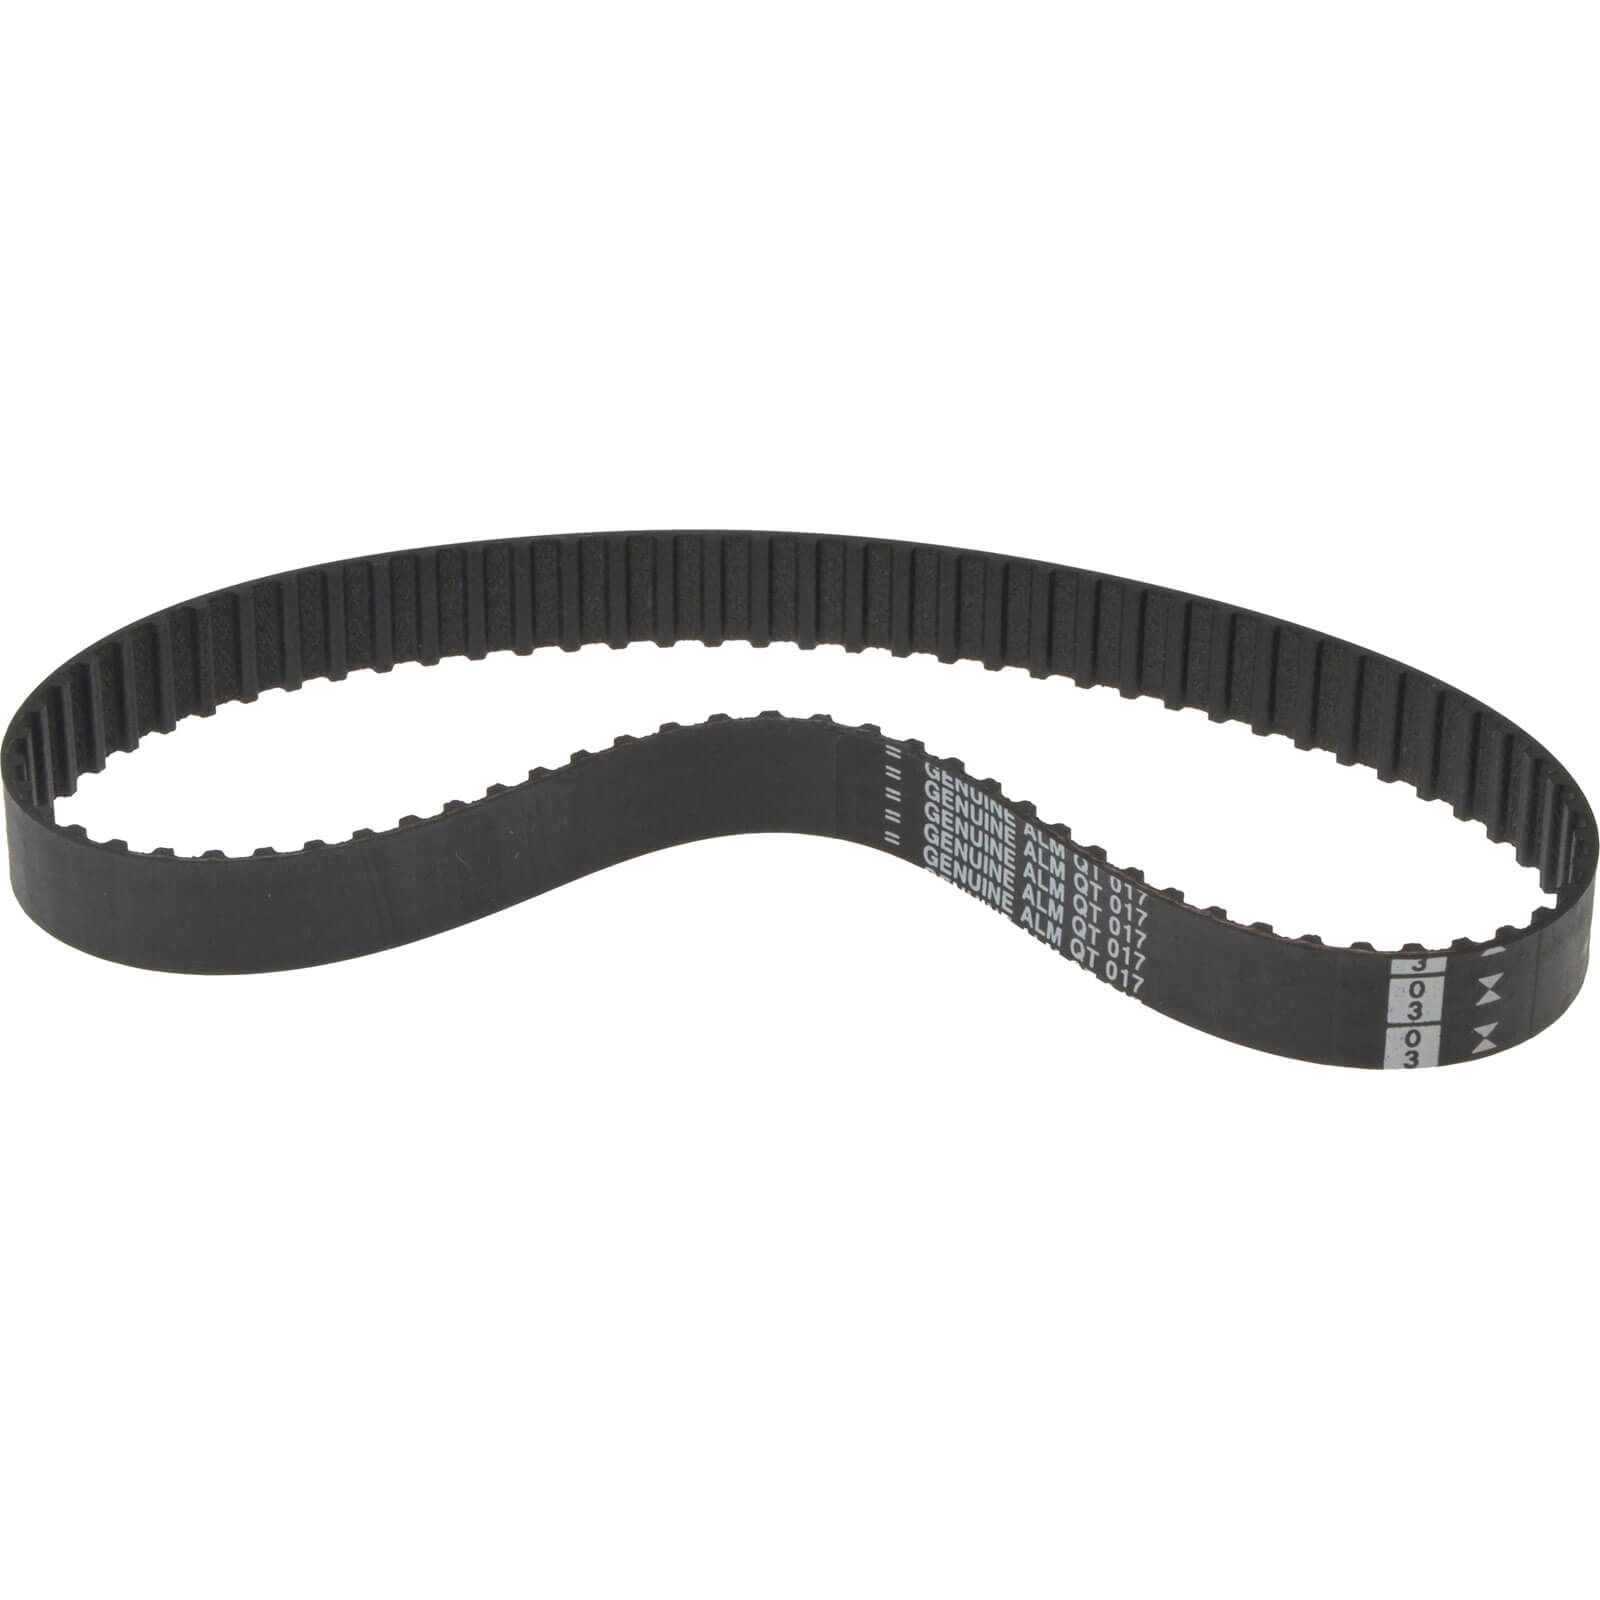 Photos - Lawn Mower Accessory ALM QT017 Drive Belt for Qualcast Rear Grass Boxed Lawnmowers 